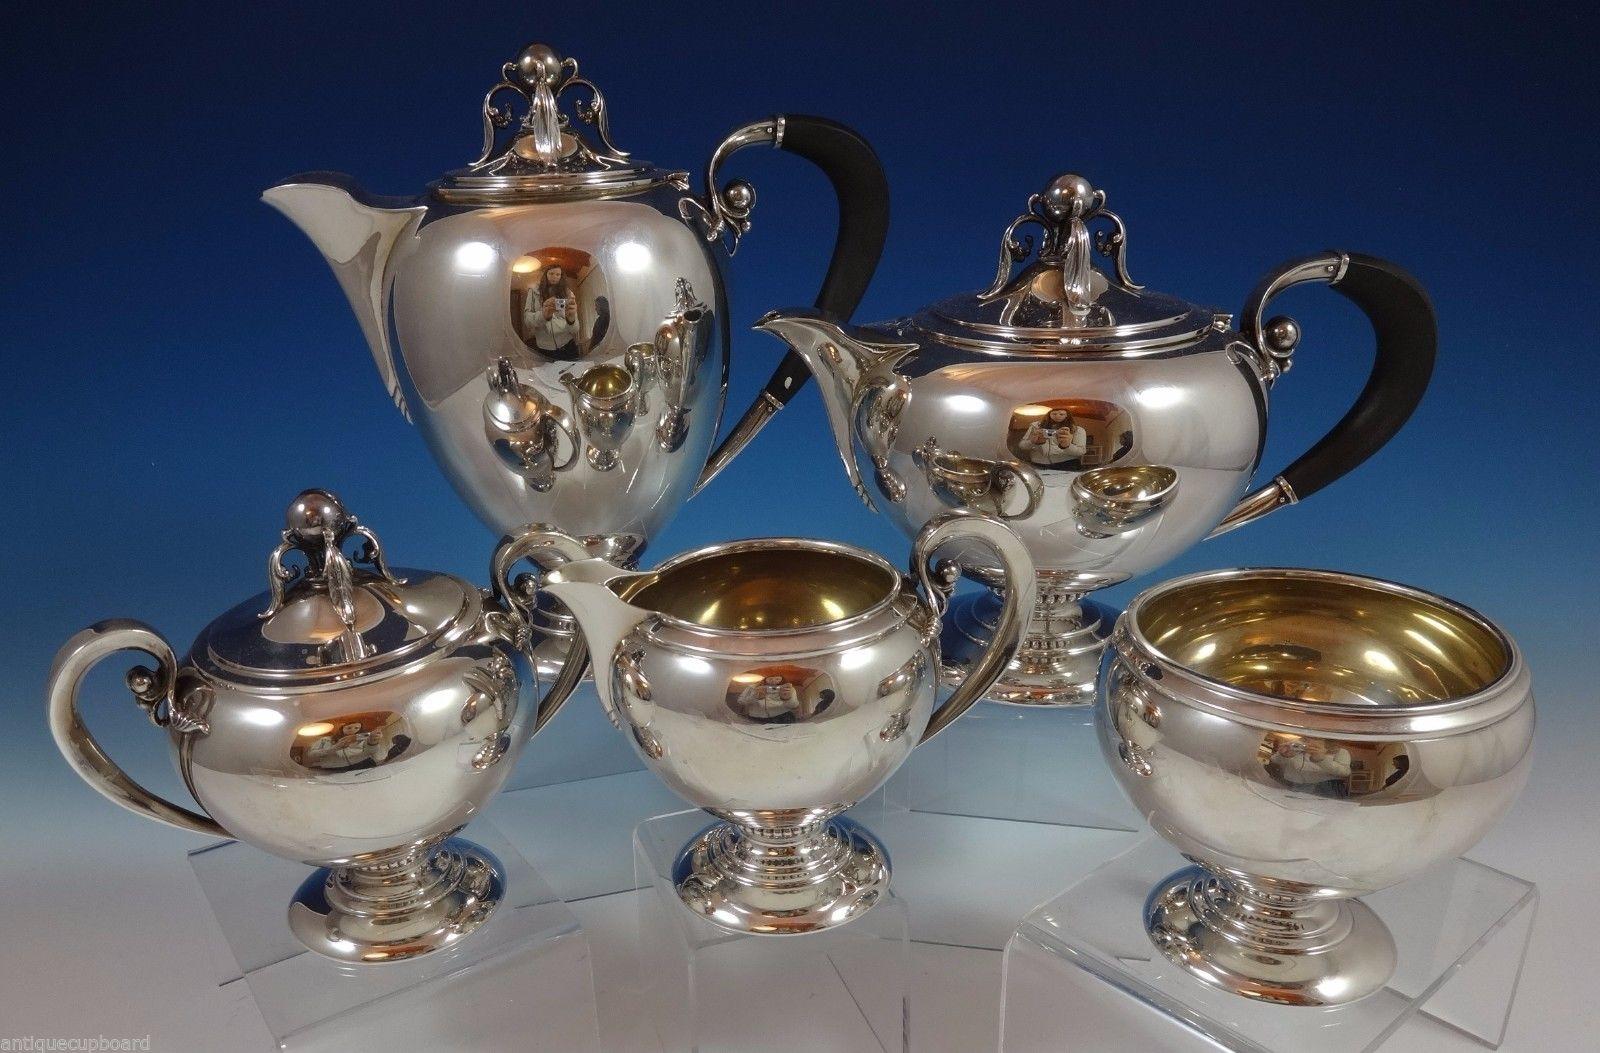 M. Fred Hirsch
Modernism sterling silver 5-piece tea set marked #600 made by M. Fred Hirsch Co. of New Jersey circa 1920-1945. The tea set features 3-D cast ball and leaf elements on the finial and by the ebony handles. The set includes: Coffee pot: